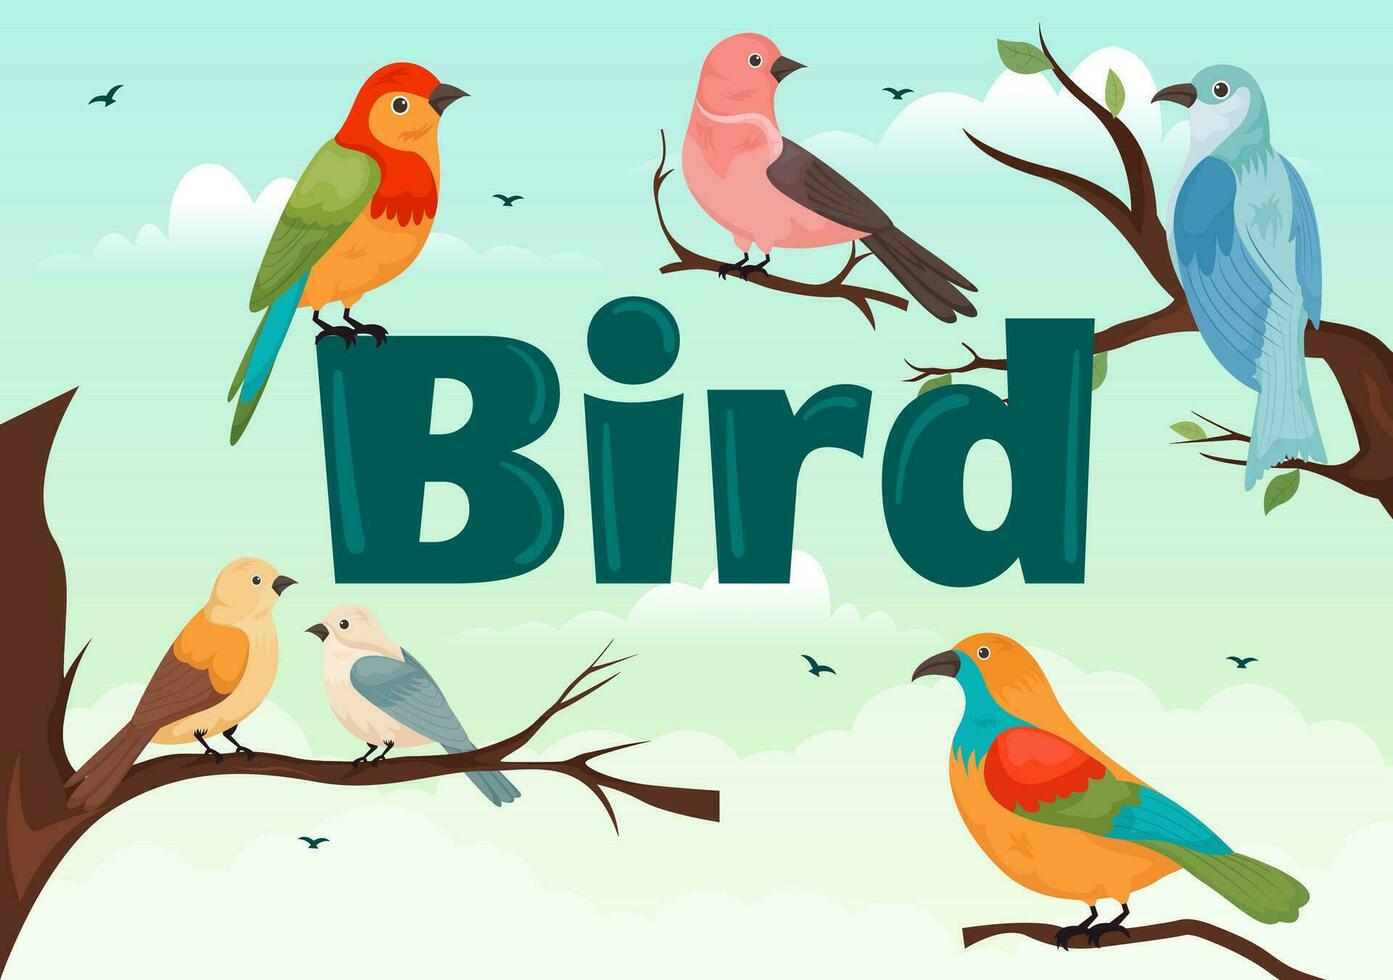 Bird Animal Vector Illustration with Birds on Tree Roots and Sky as Background in Flat Cartoon Style Design Template